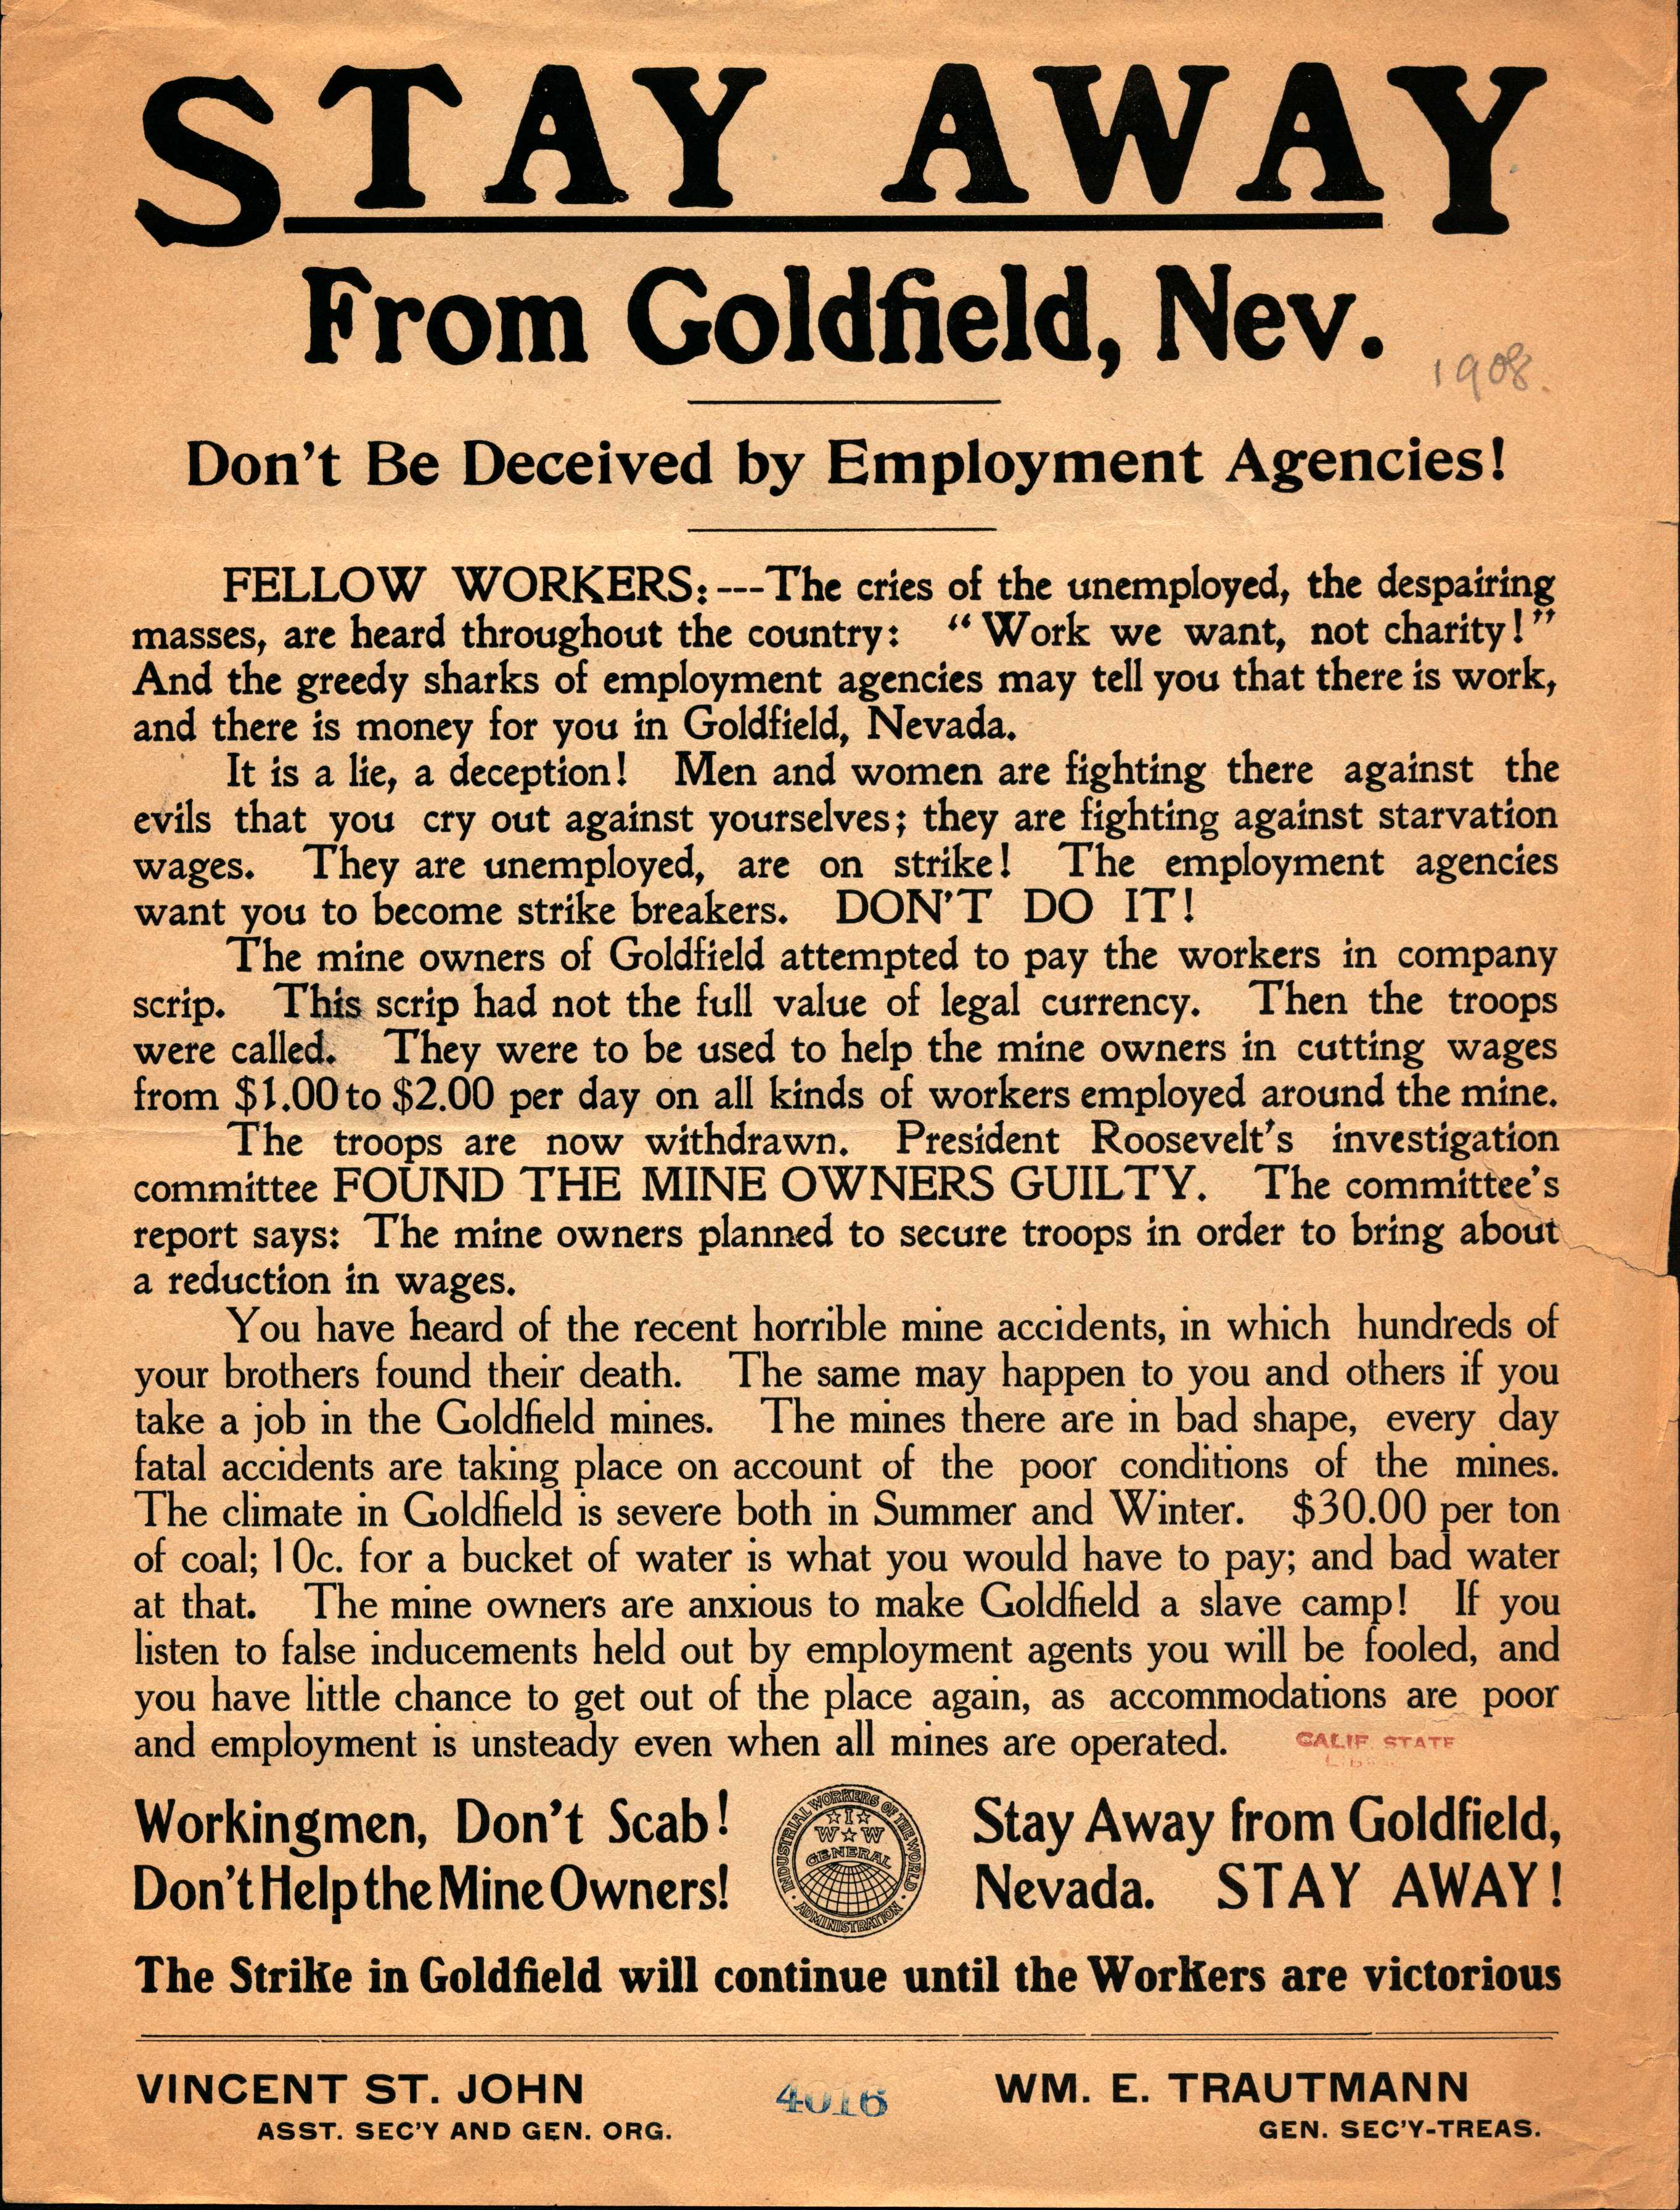 Shows a warning against scabbing in Goldfield Nevada